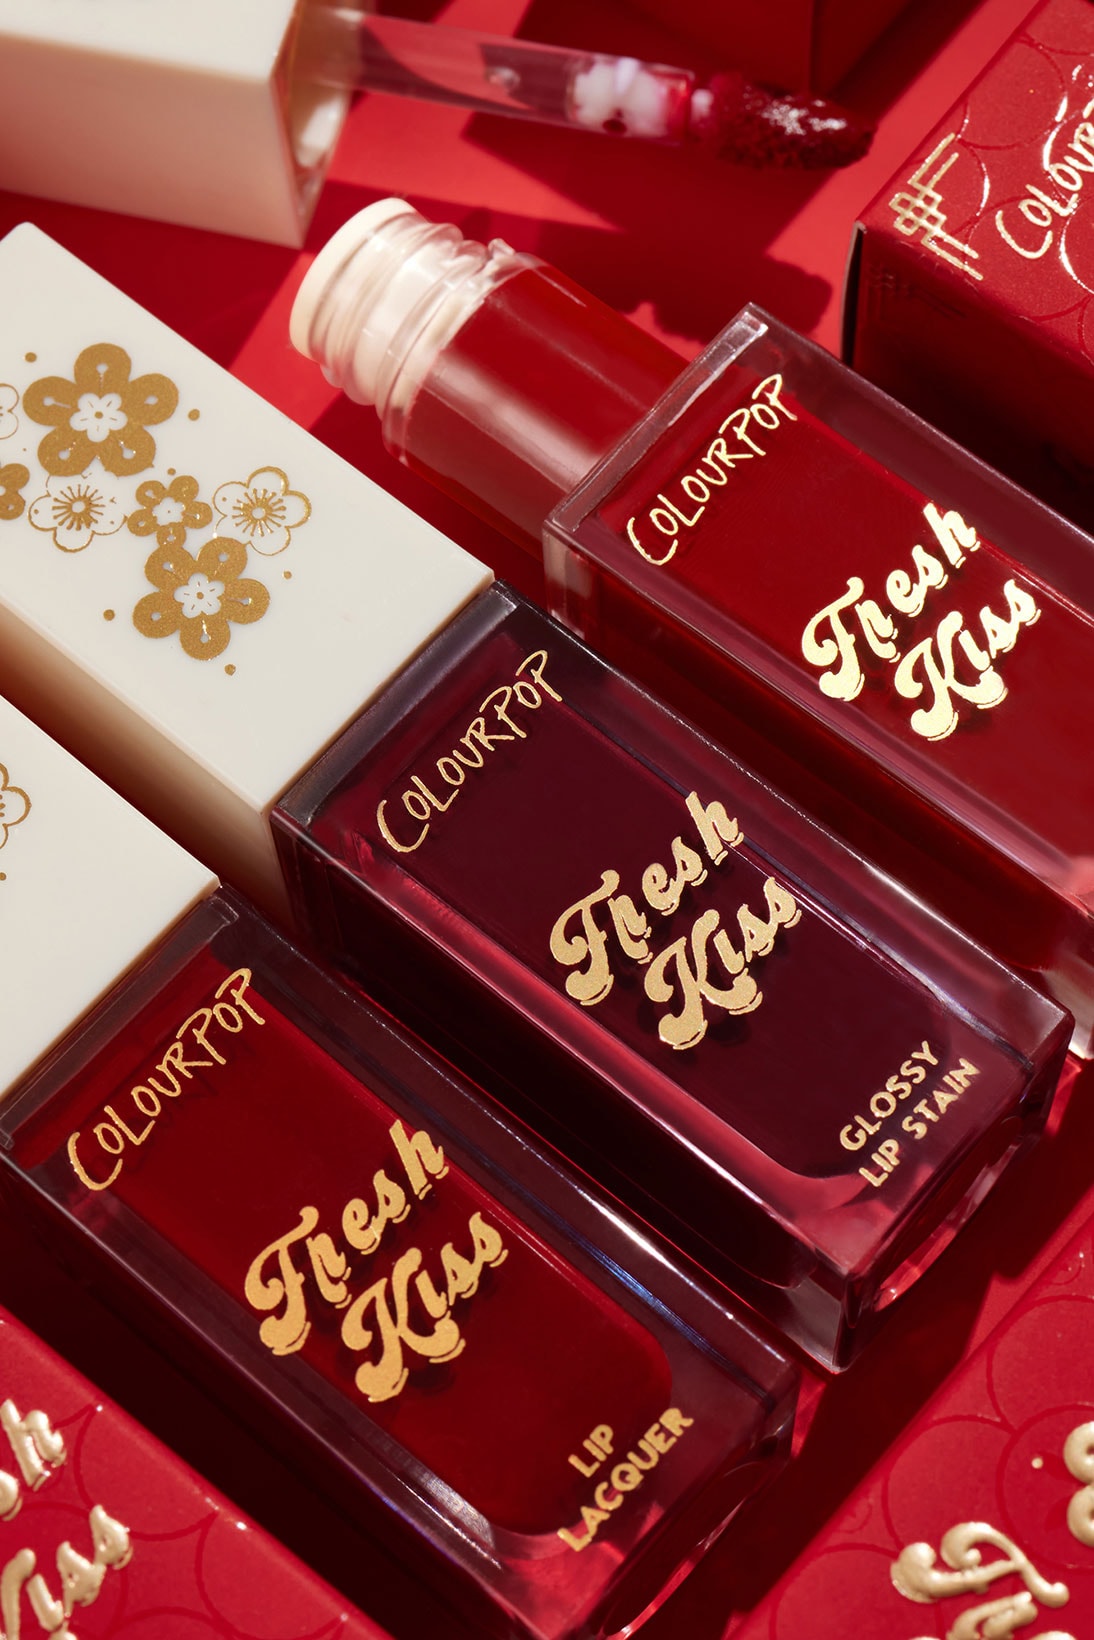 ColourPop Cosmetics Year of the Tiger Lunar New Year Collection Lipsticks